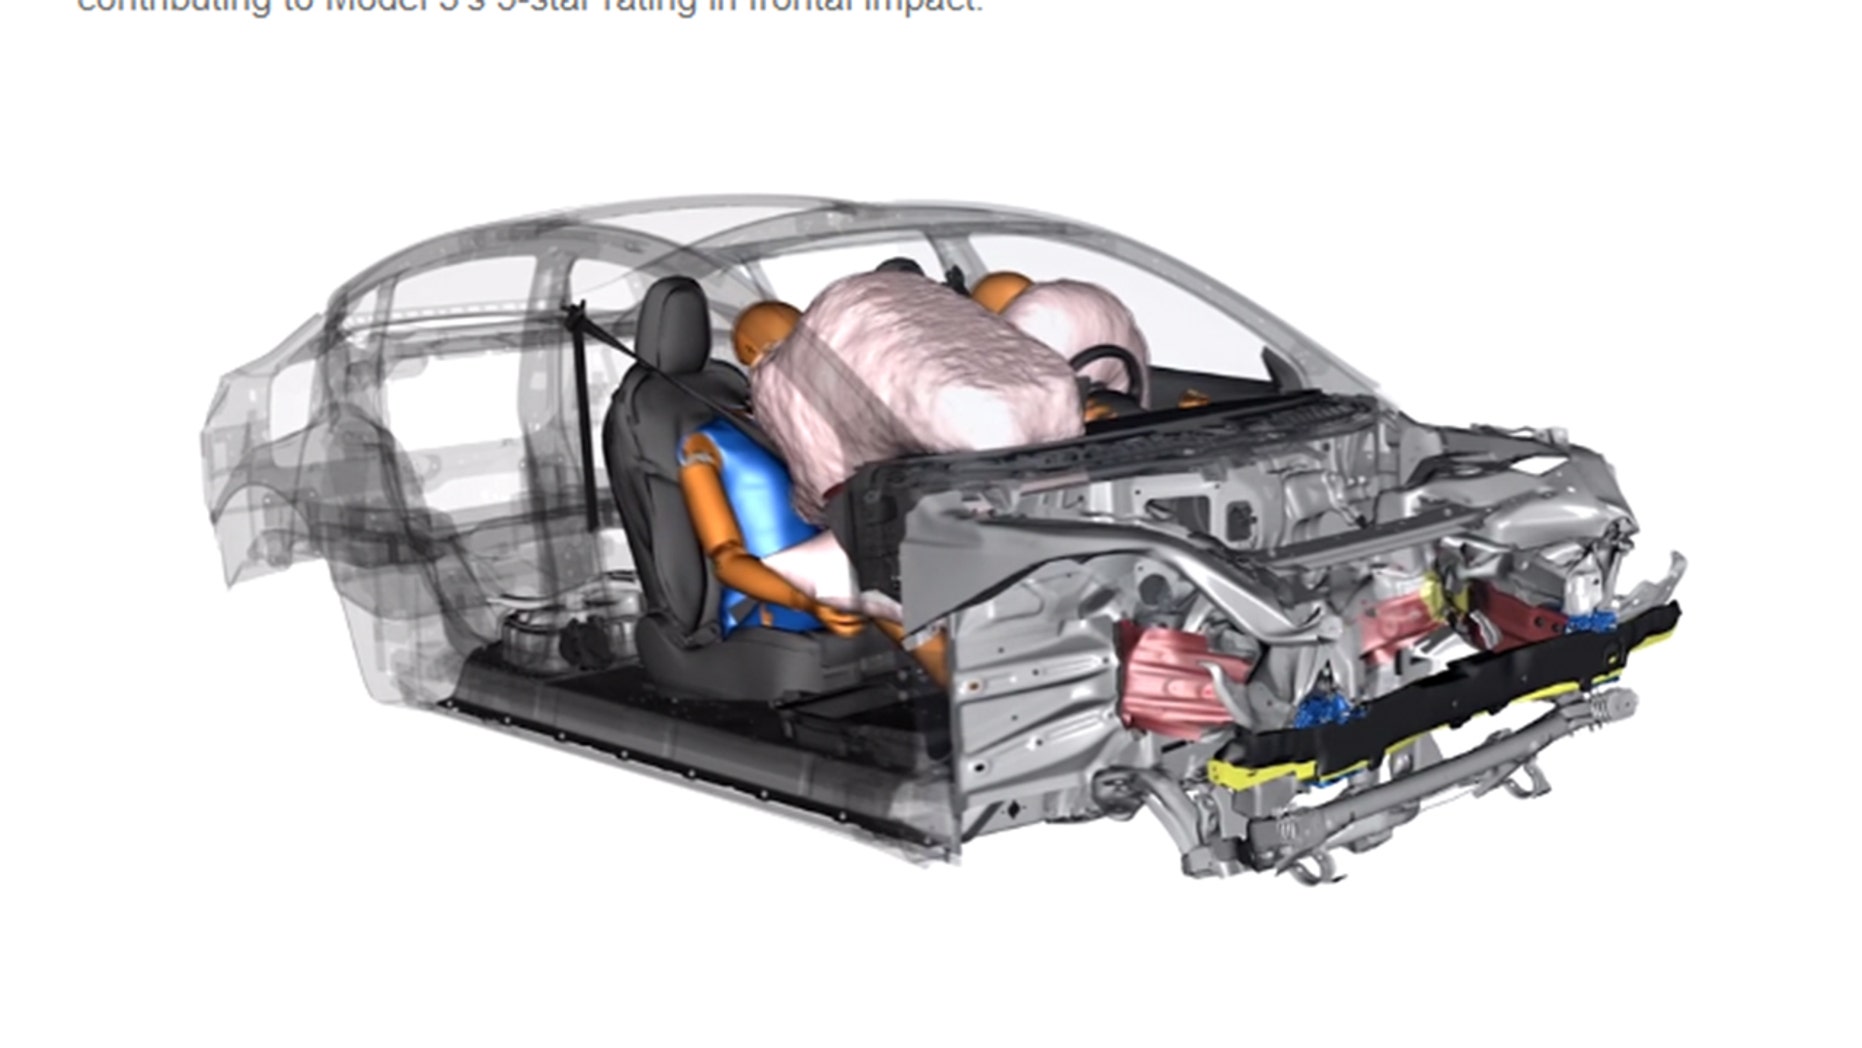 Tesla has released CAD animations of model 3 crash tests to illustrate its analysis.